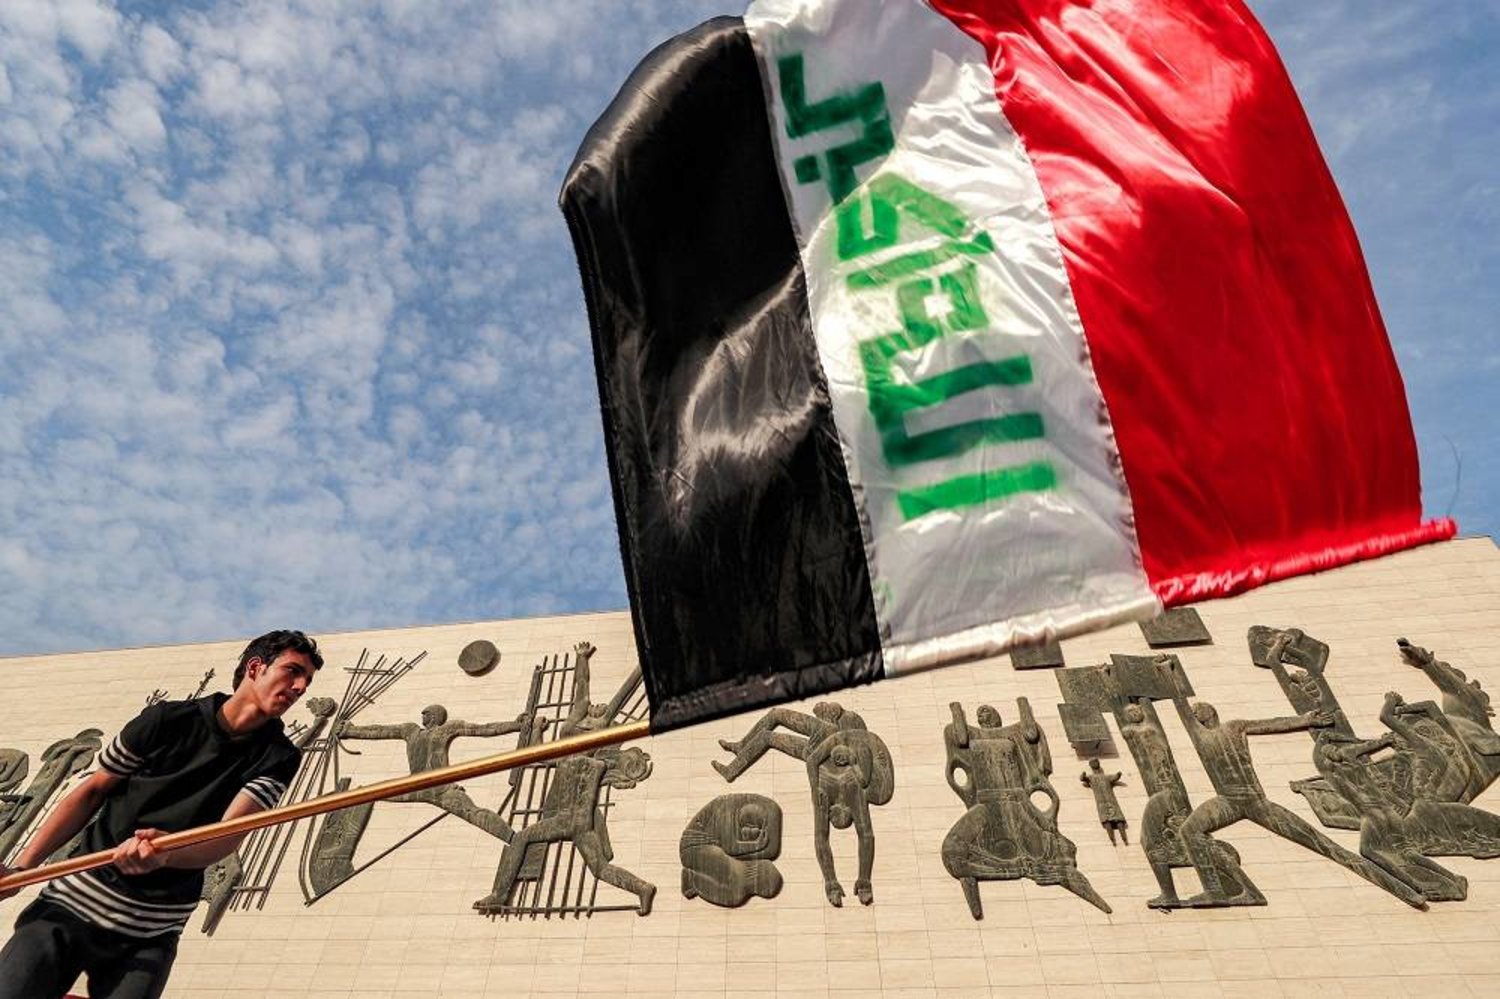 A man waves an Iraqi national flag as protesters gather in Baghdad's Tahrir square to mark the 4th anniversary of the 2019 anti-government demonstrations on October 1, 2023. (AFP)